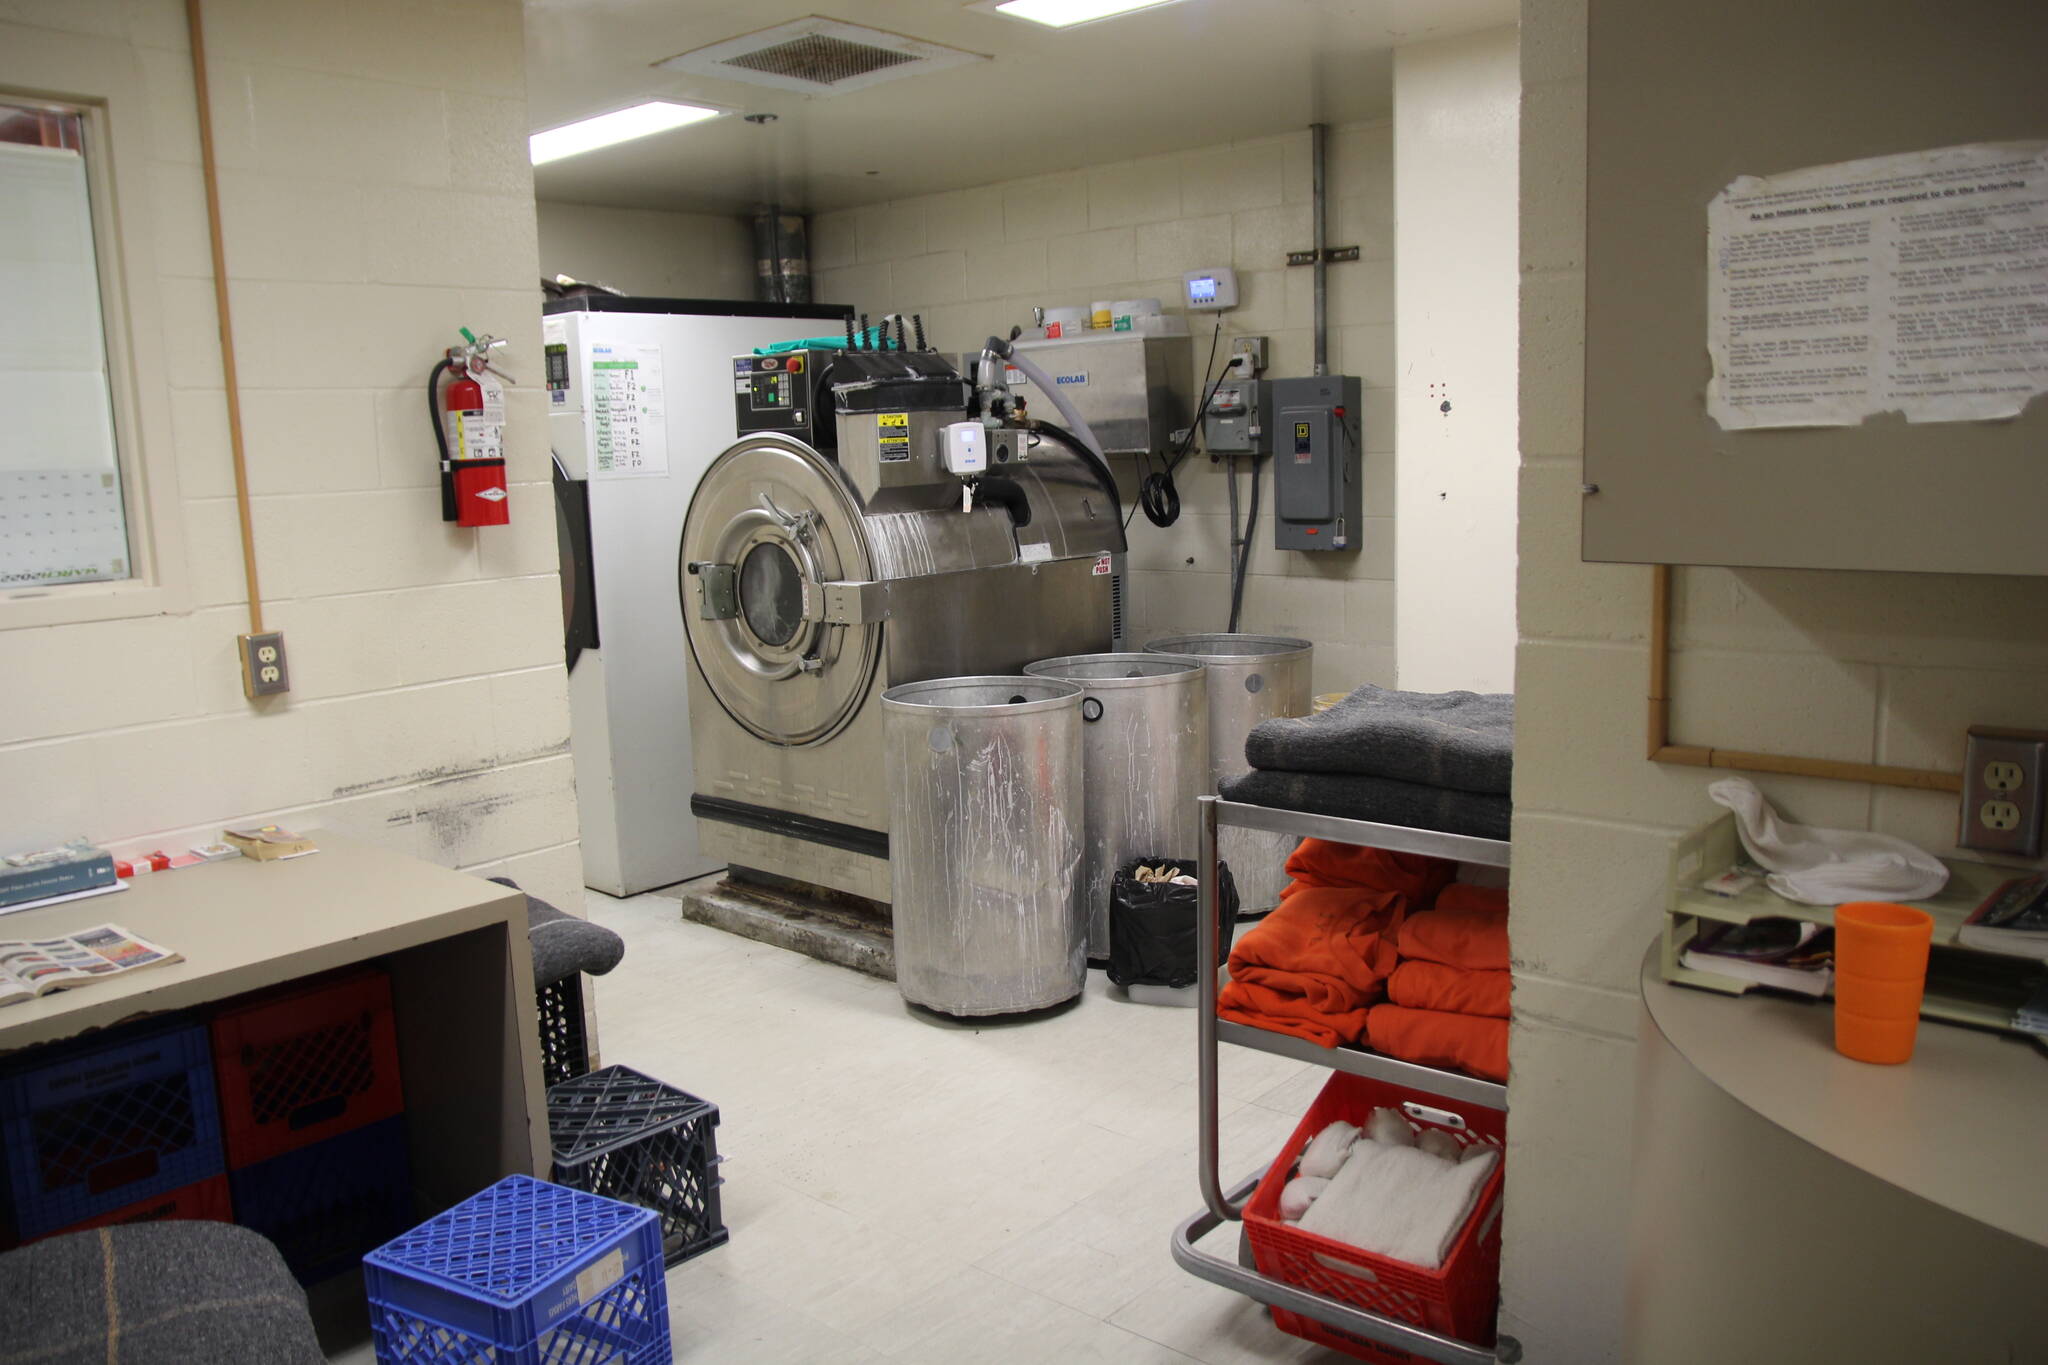 The jail has limited space for laundry facilities. (Photo by Jessie Stensland)